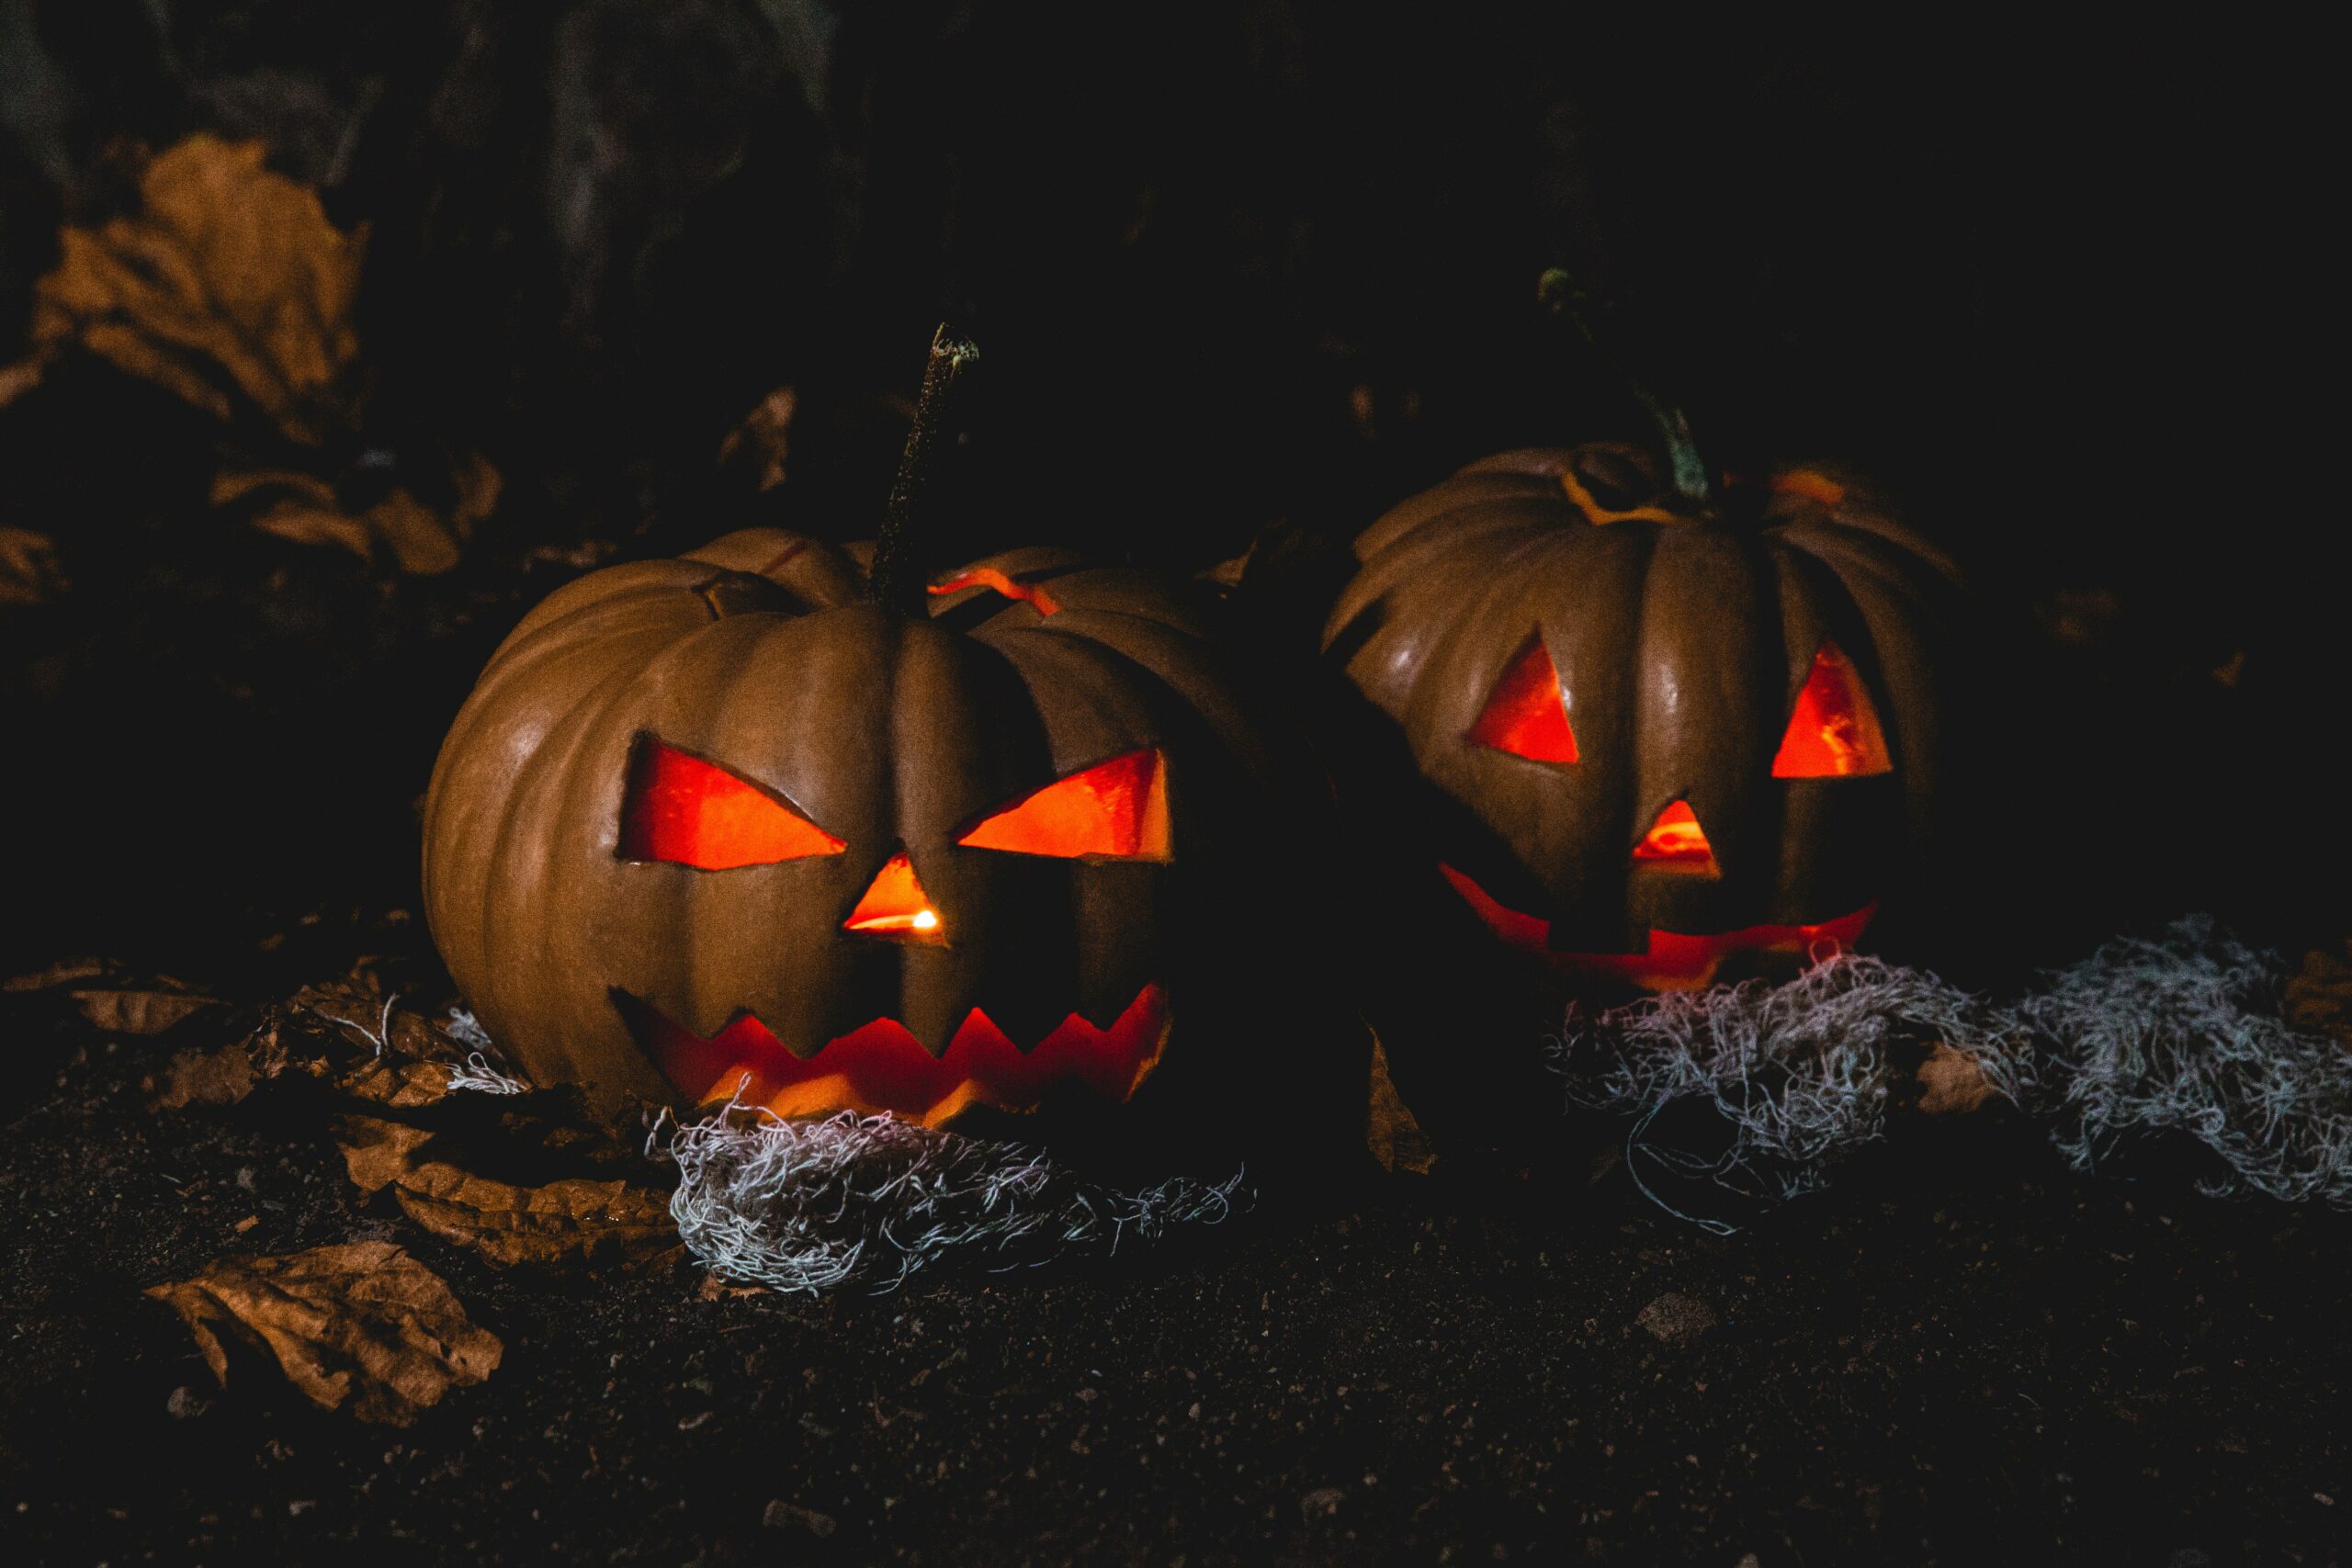 two carved pumpkins with red lights and spooky decorations at night | halloween activities Highlands Ranch